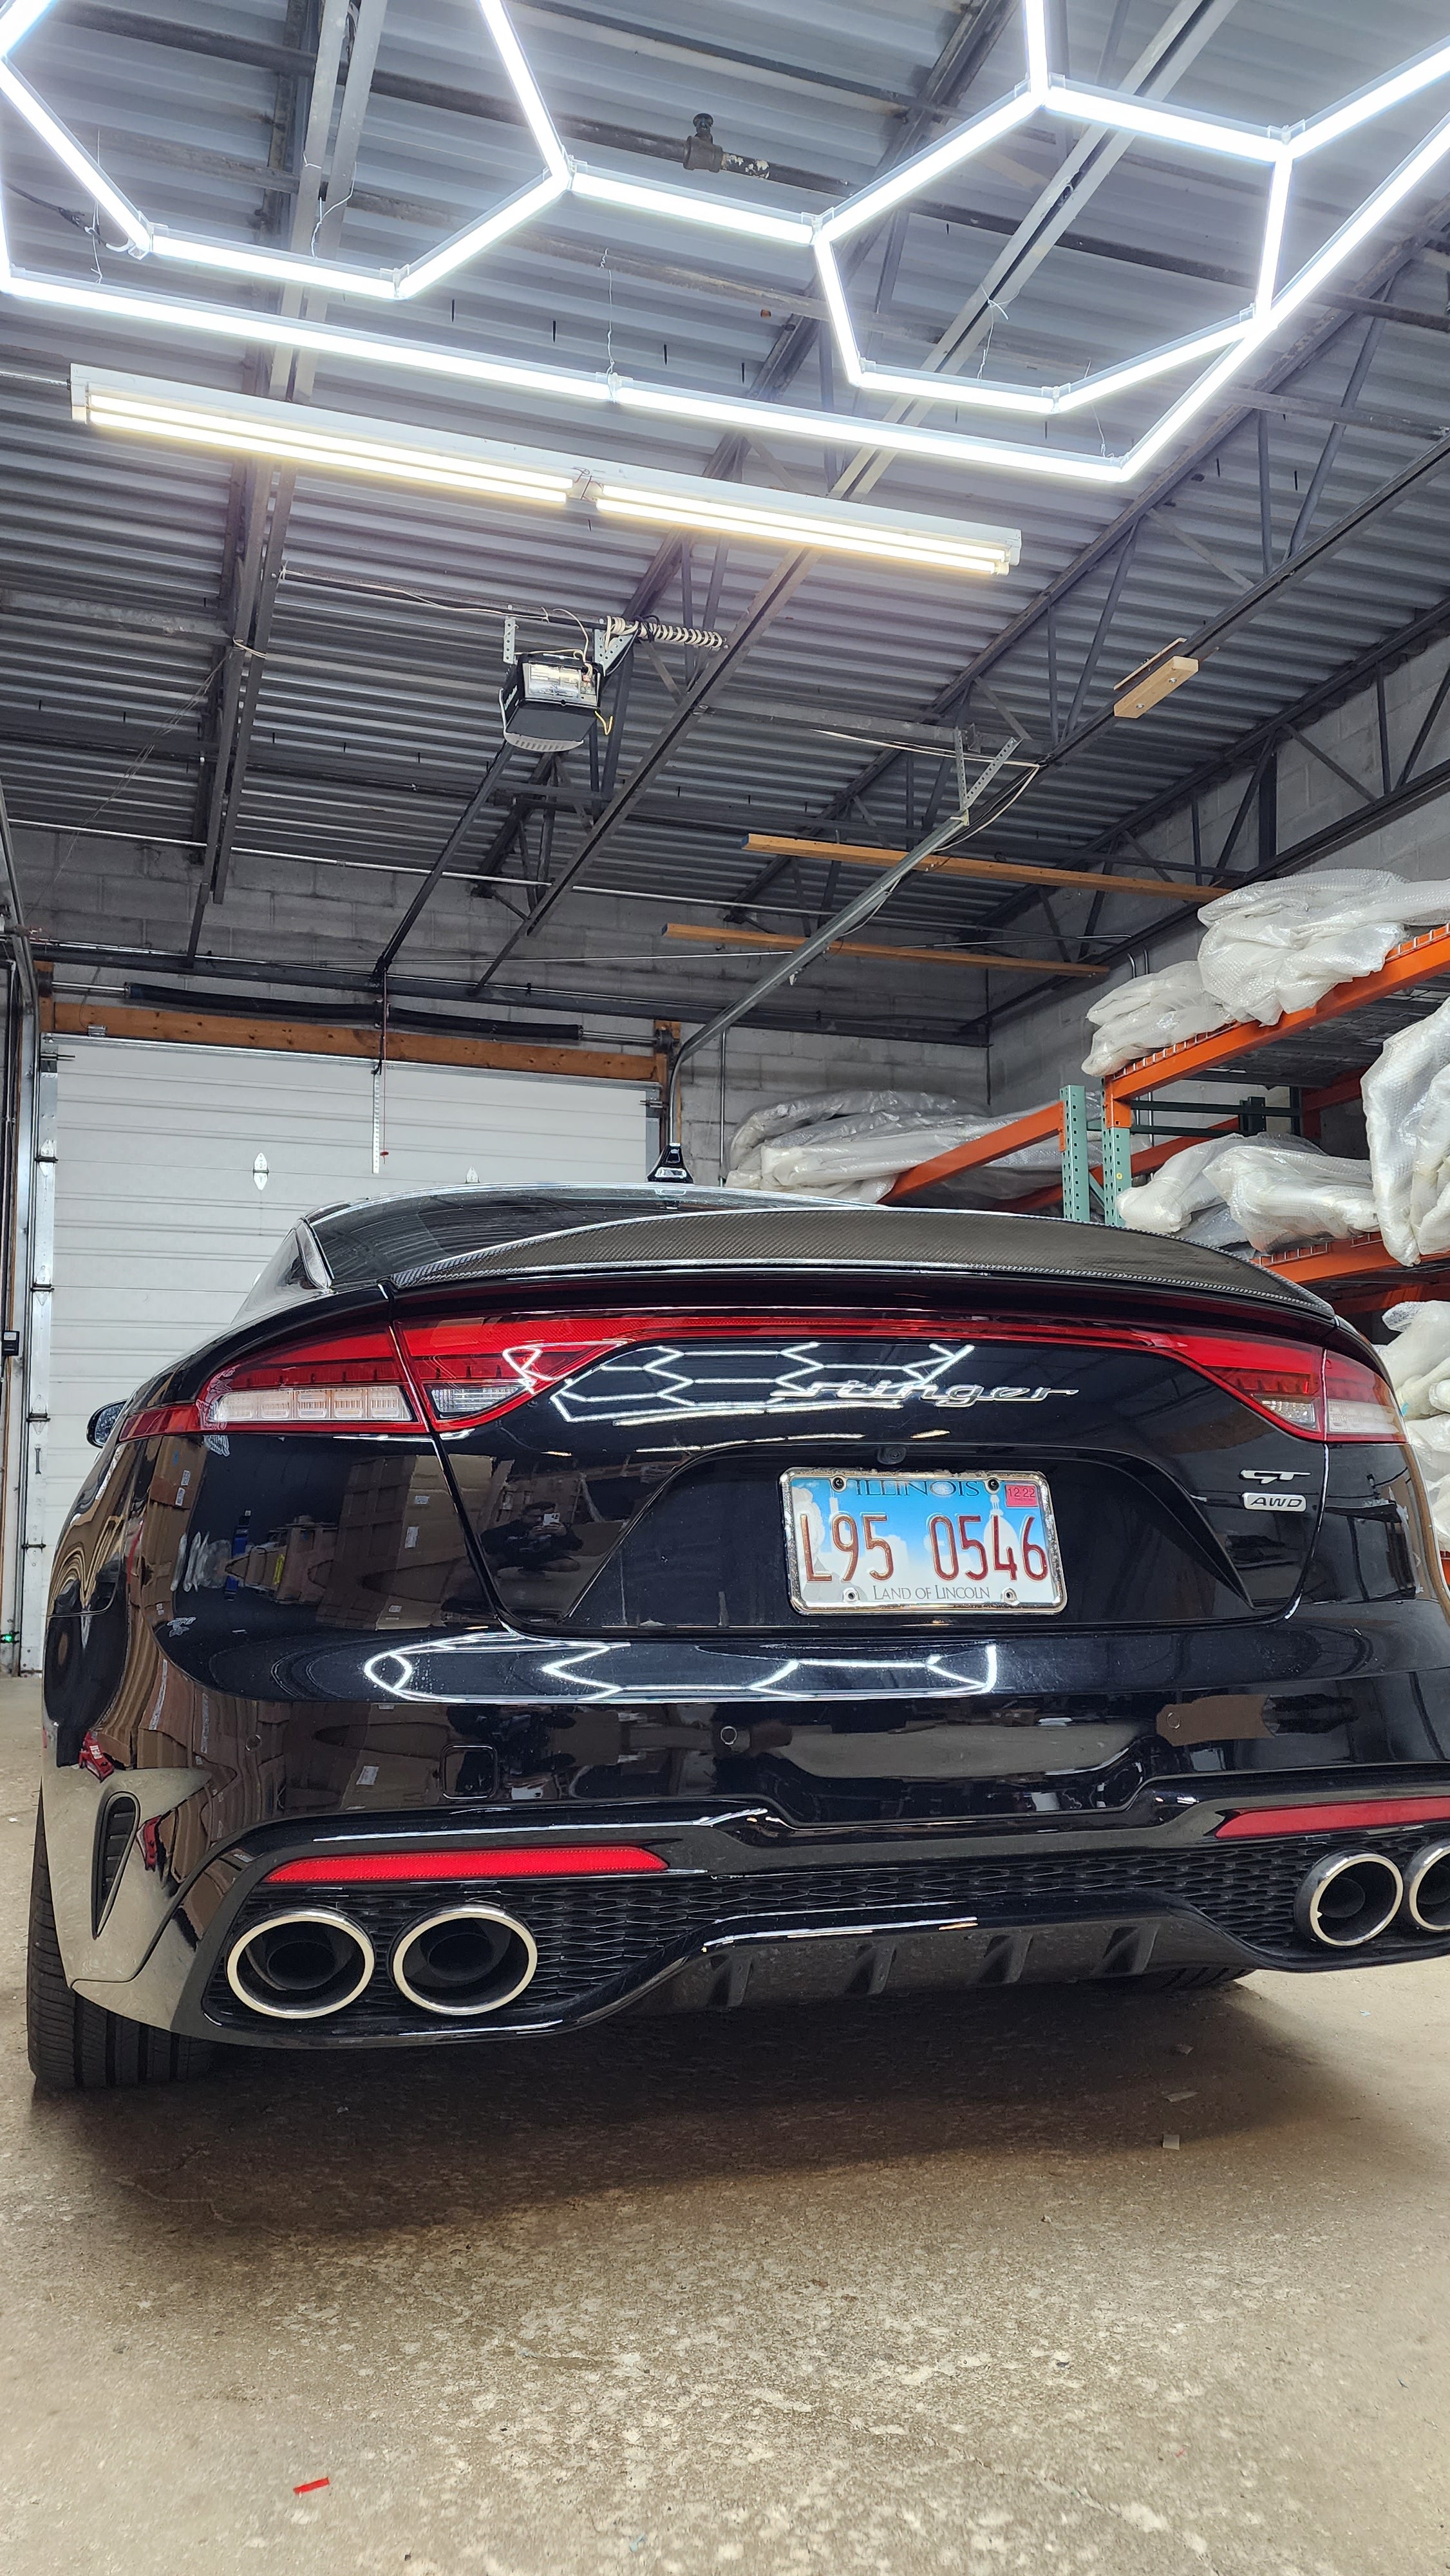 Direct rear view of the Kia Stinger featuring Jalisco's CF Duckbill Spoiler, emphasizing the spoiler's impact on the car's overall rear profile and its aerodynamic shape